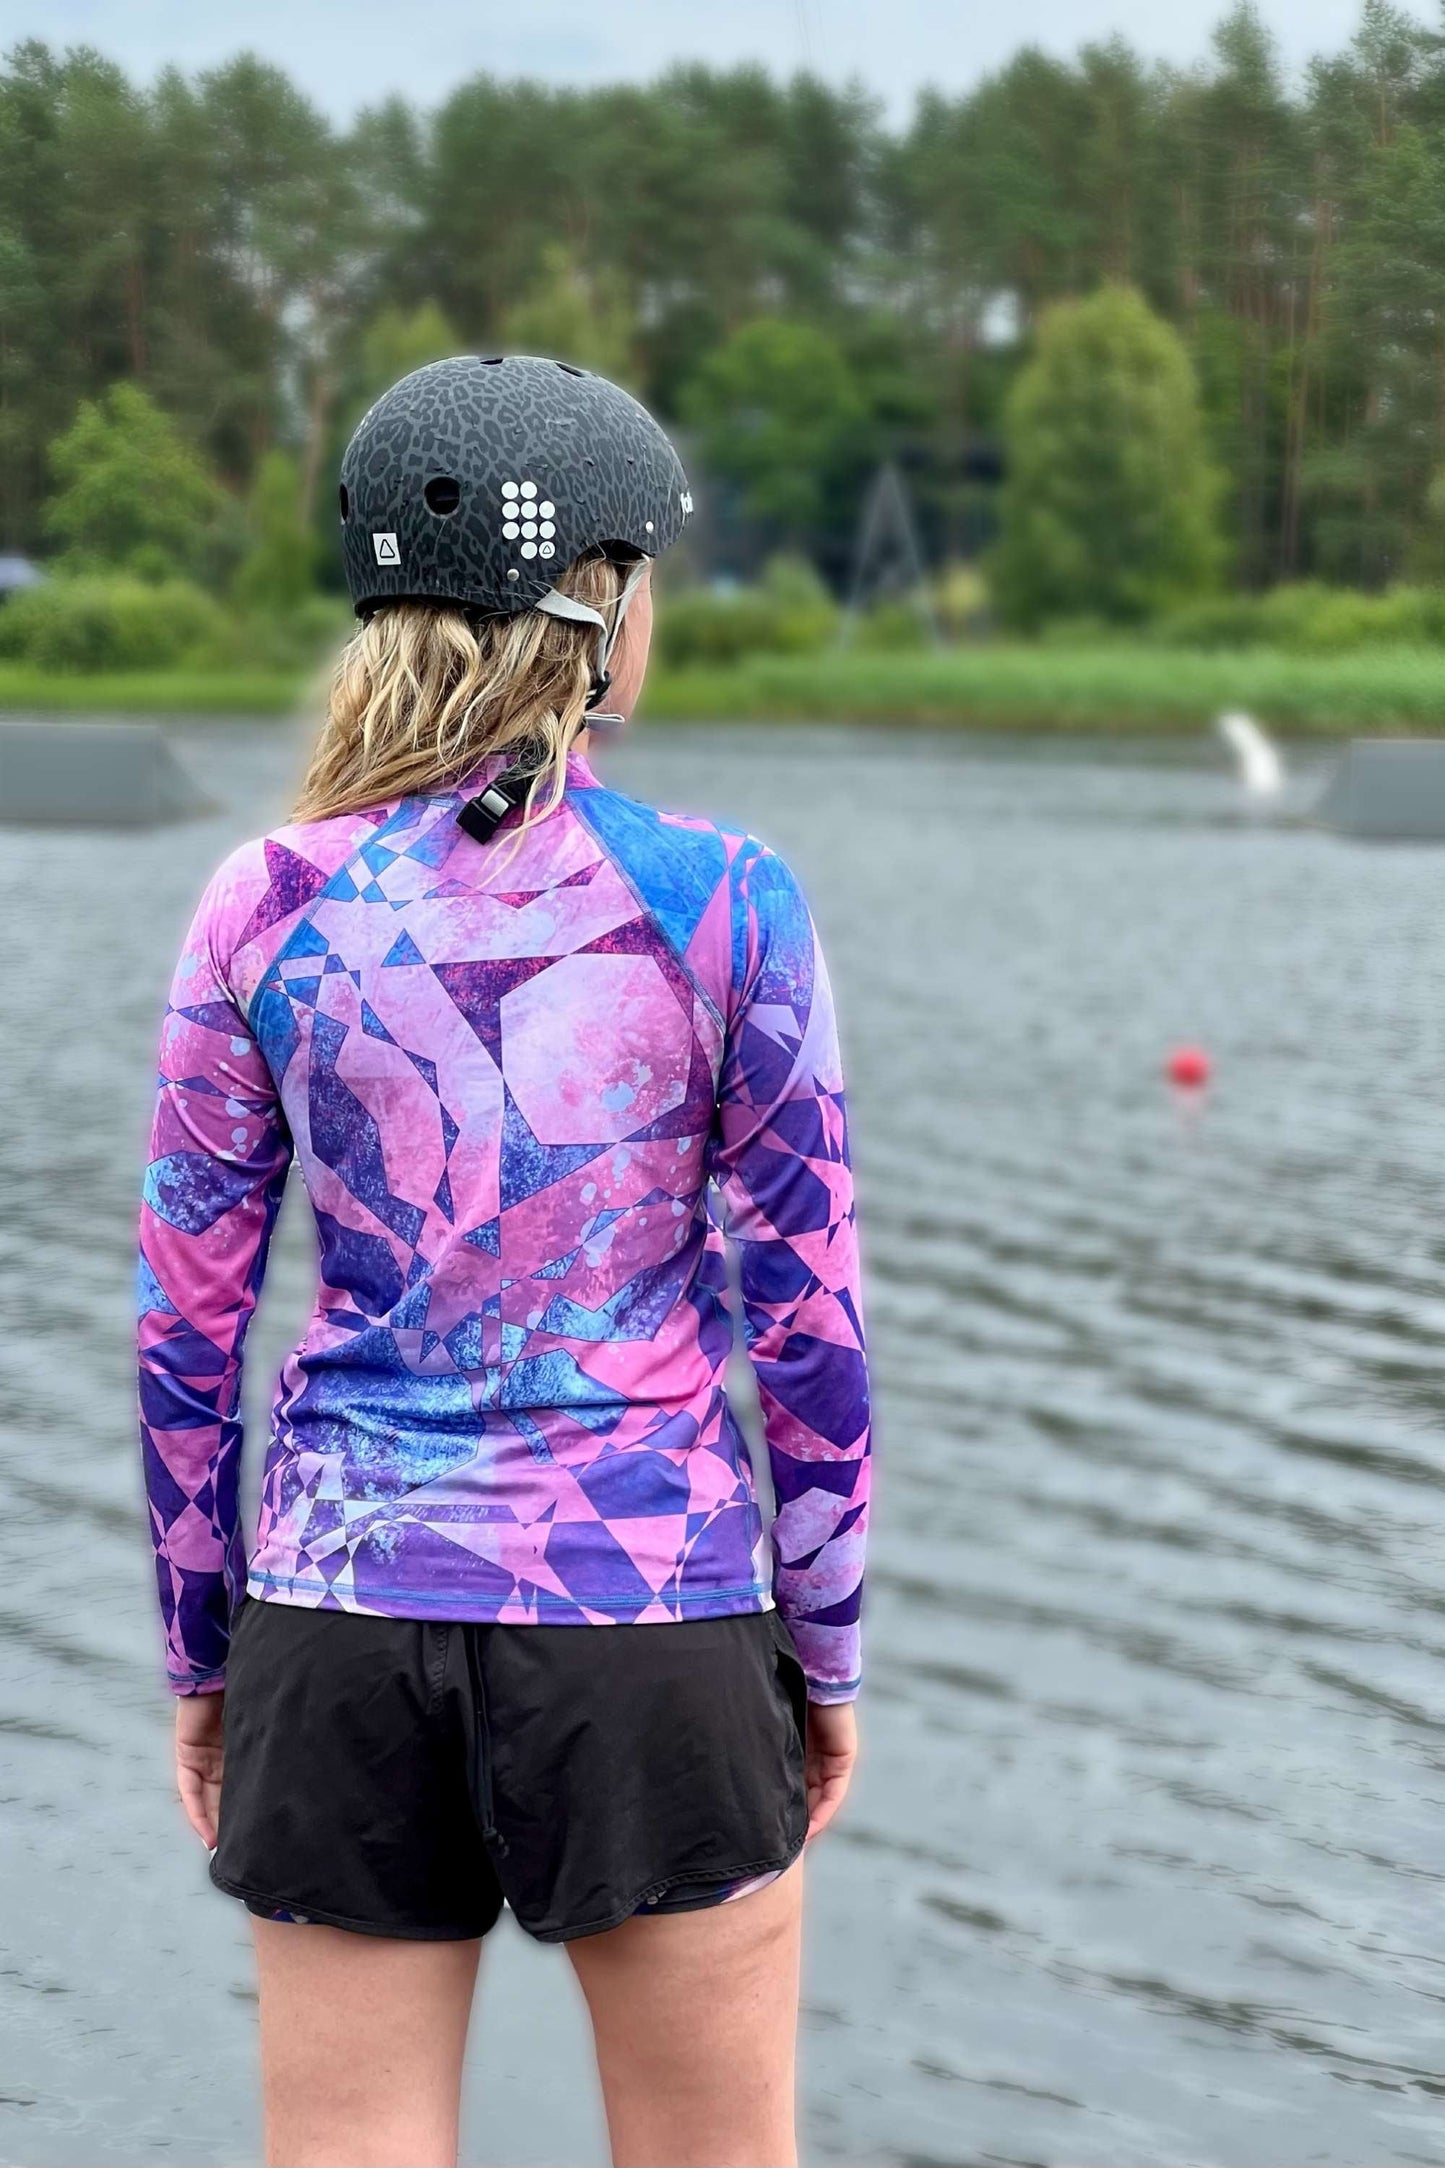 Women's Long Sleeve Rash Guard for Water Sports| Women's Lycra| Summer water sports outfit| Active lifestyle| Sun and wind protection